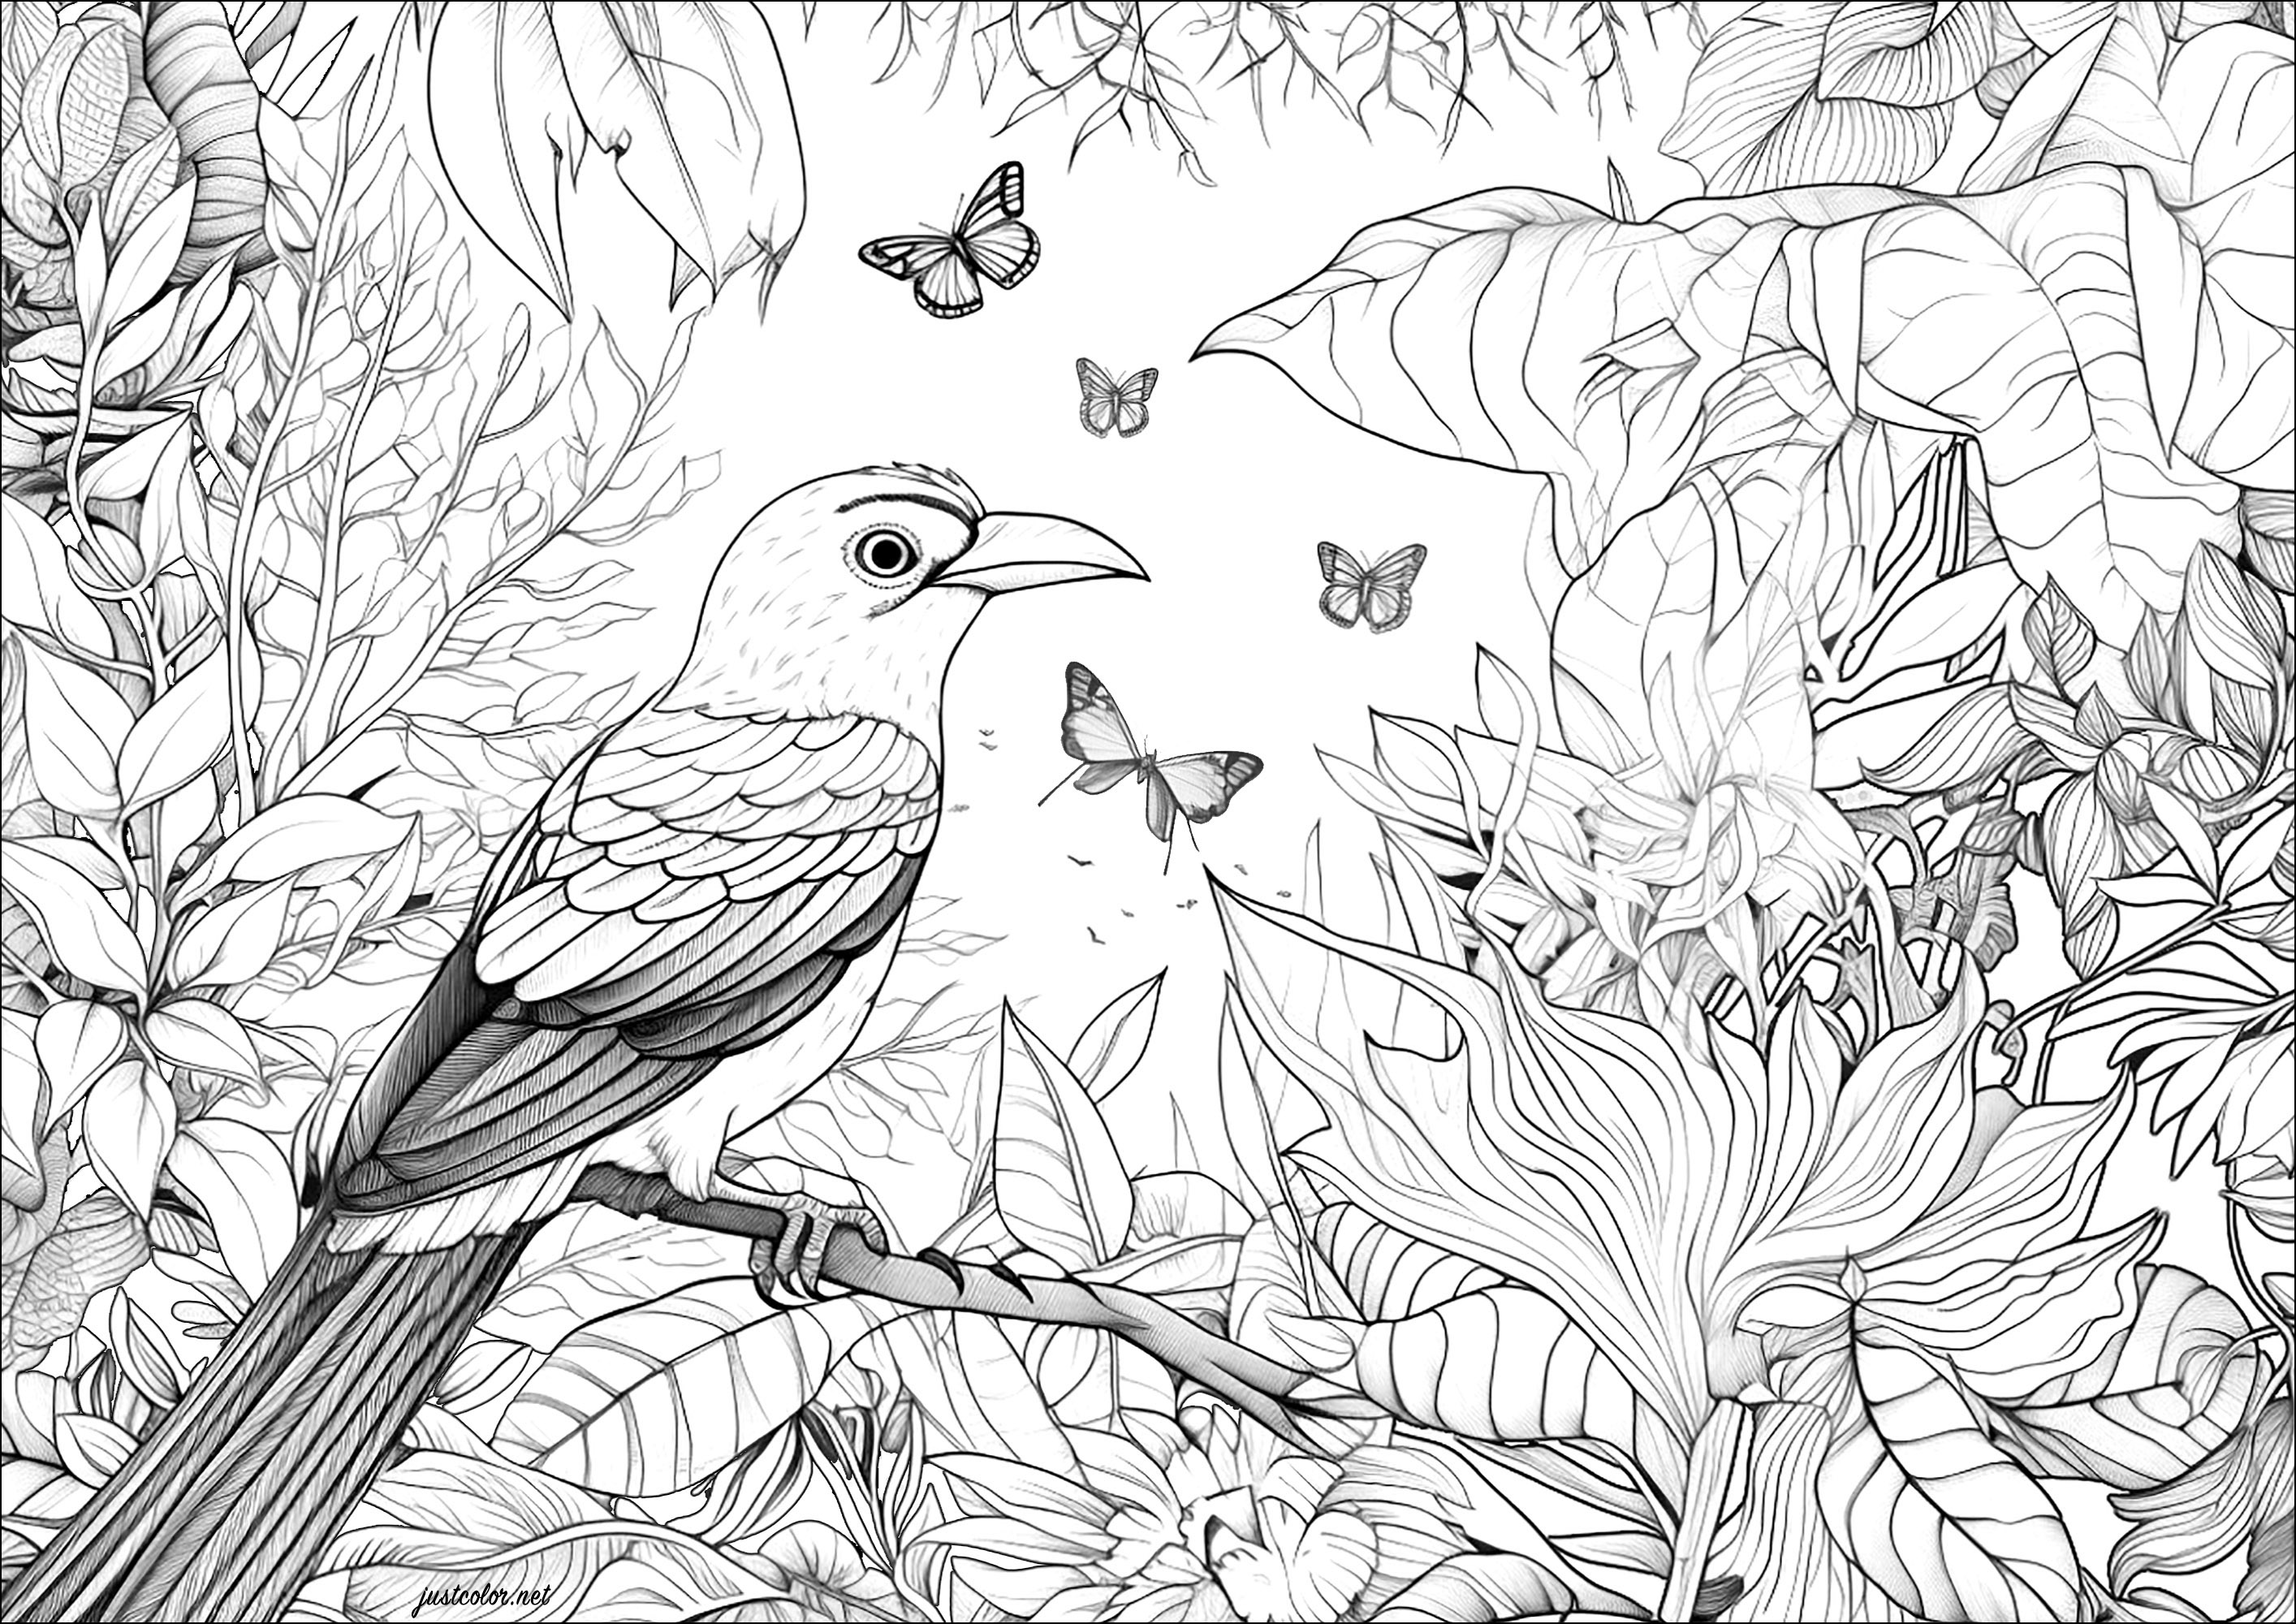 Tropical birds and butterflies. A coloring page full of pretty details